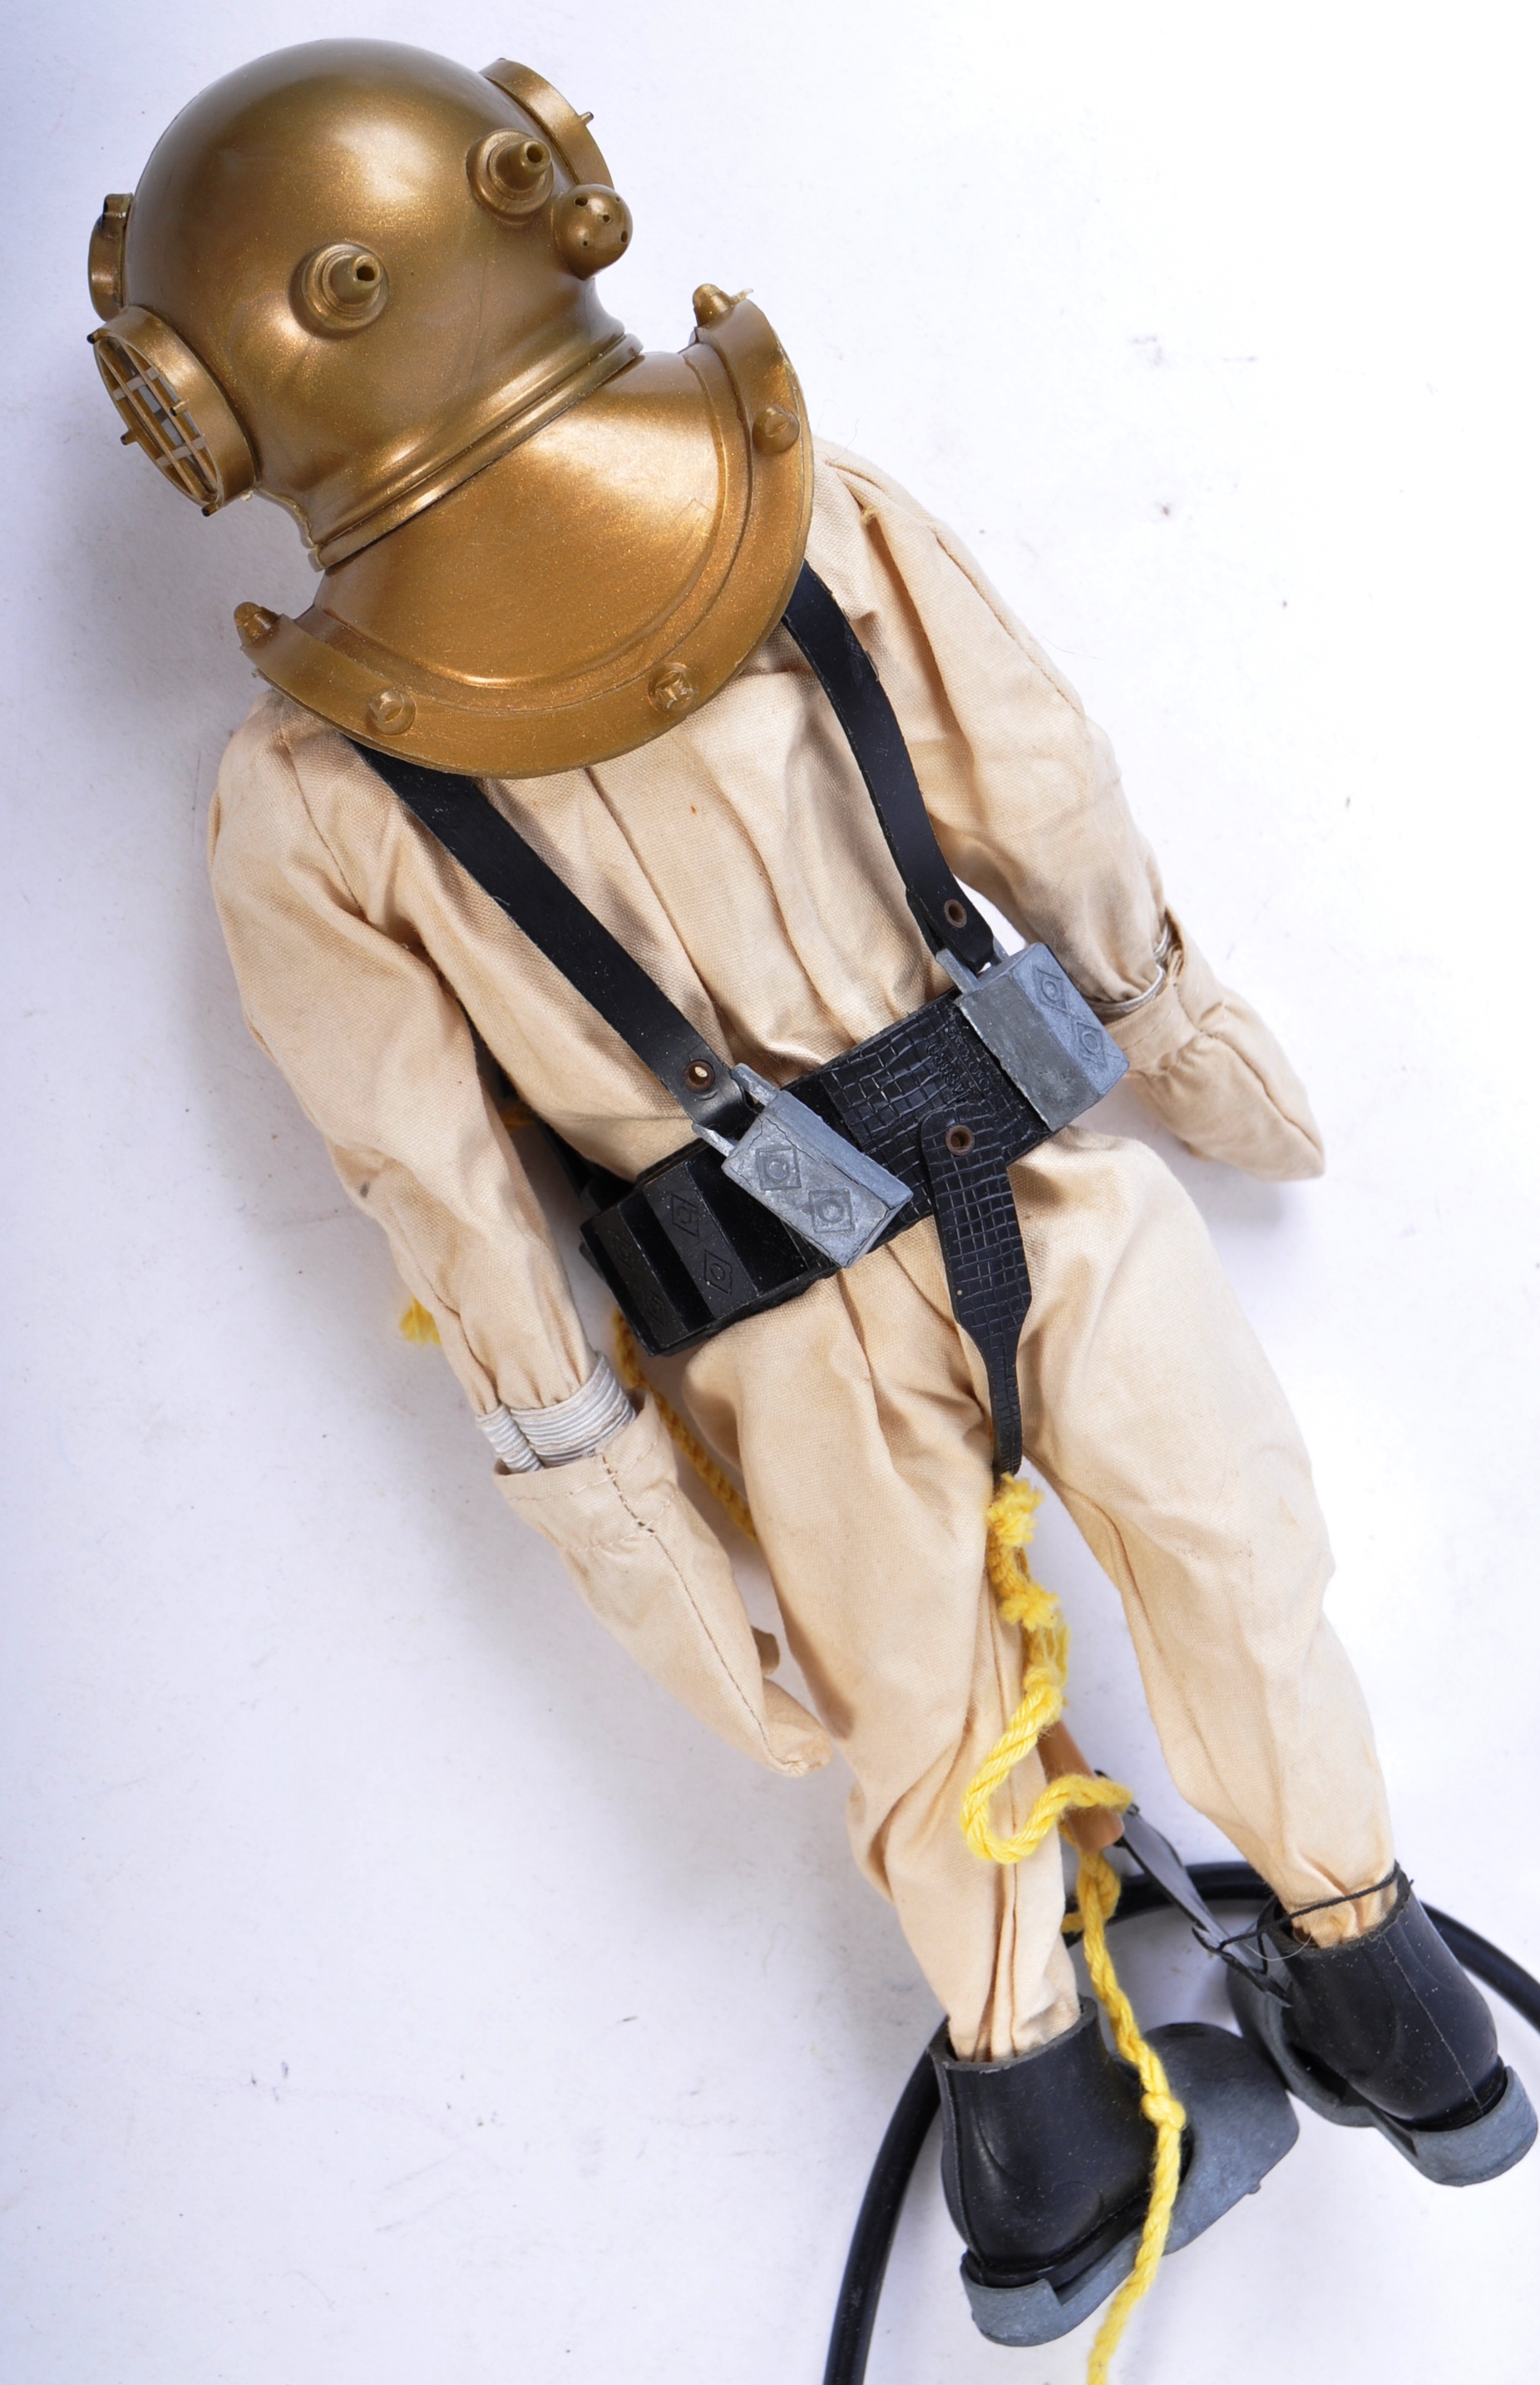 ORIGINAL VINTAGE PALITOY ACTION MAN SOLDIER & OUTFIT - Image 4 of 4